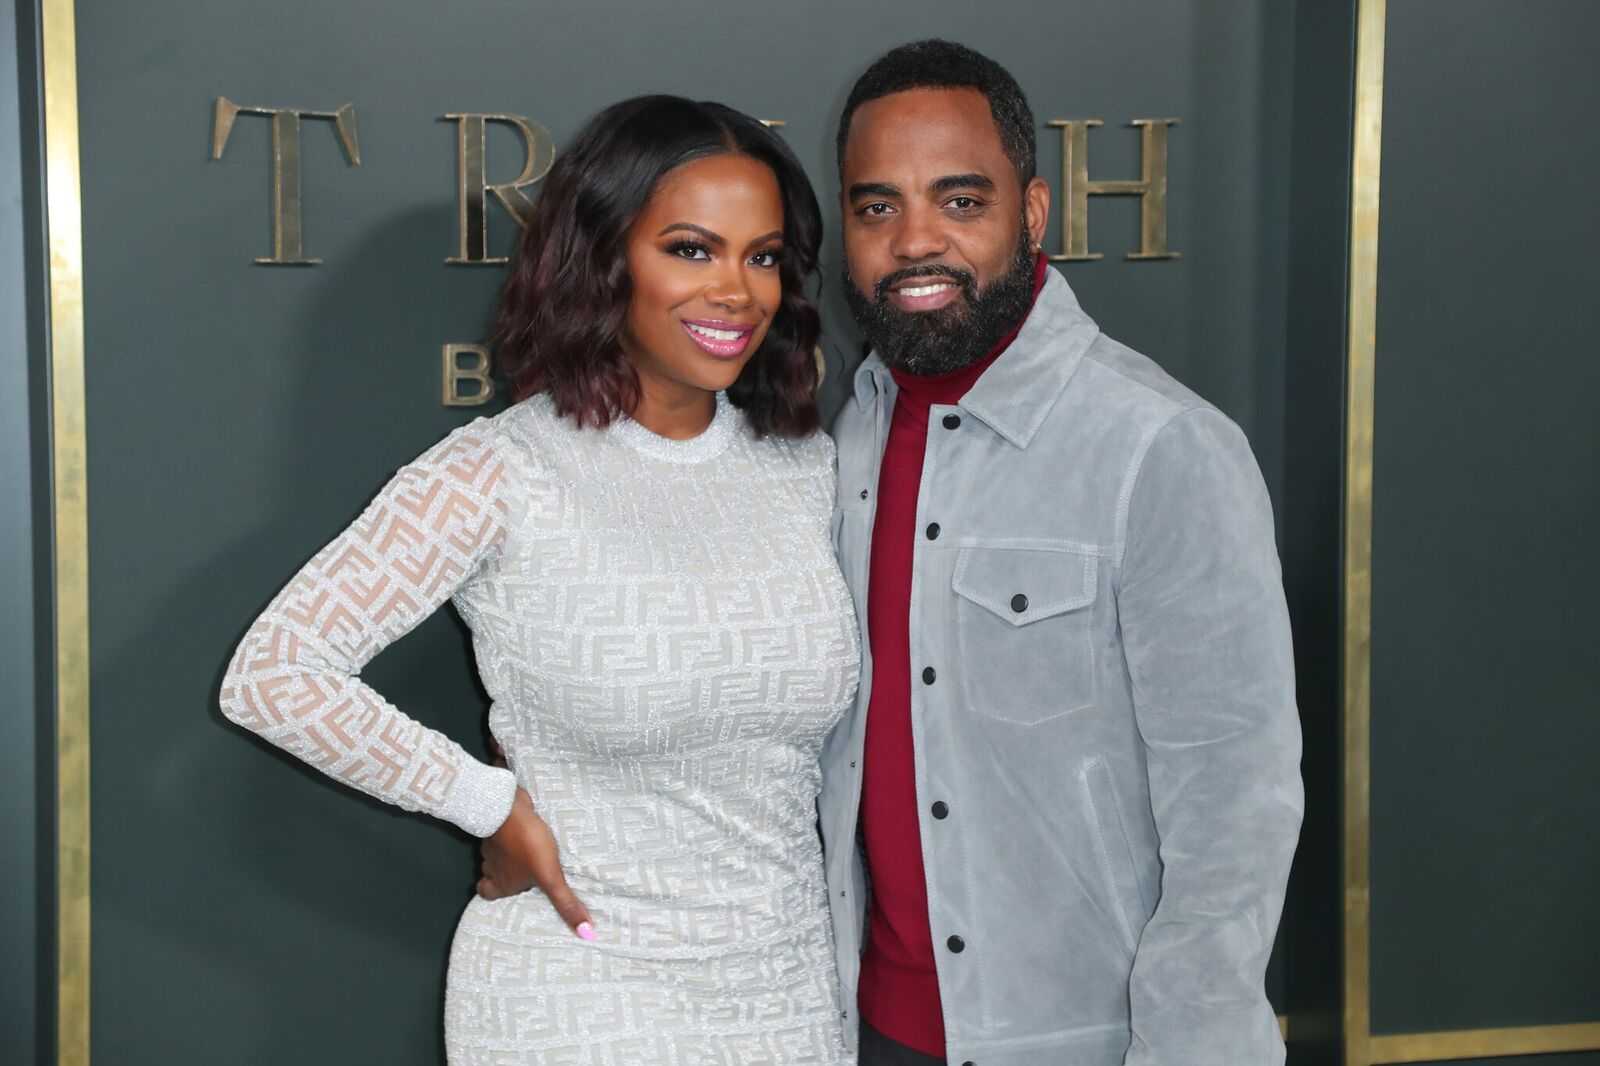 Kandi Burruss and Todd Tucker attend Premiere Of Apple TV+'s "Truth Be Told" at AMPAS Samuel Goldwyn Theater on November 11, 2019 in Beverly Hills, California | Photo: Getty Images